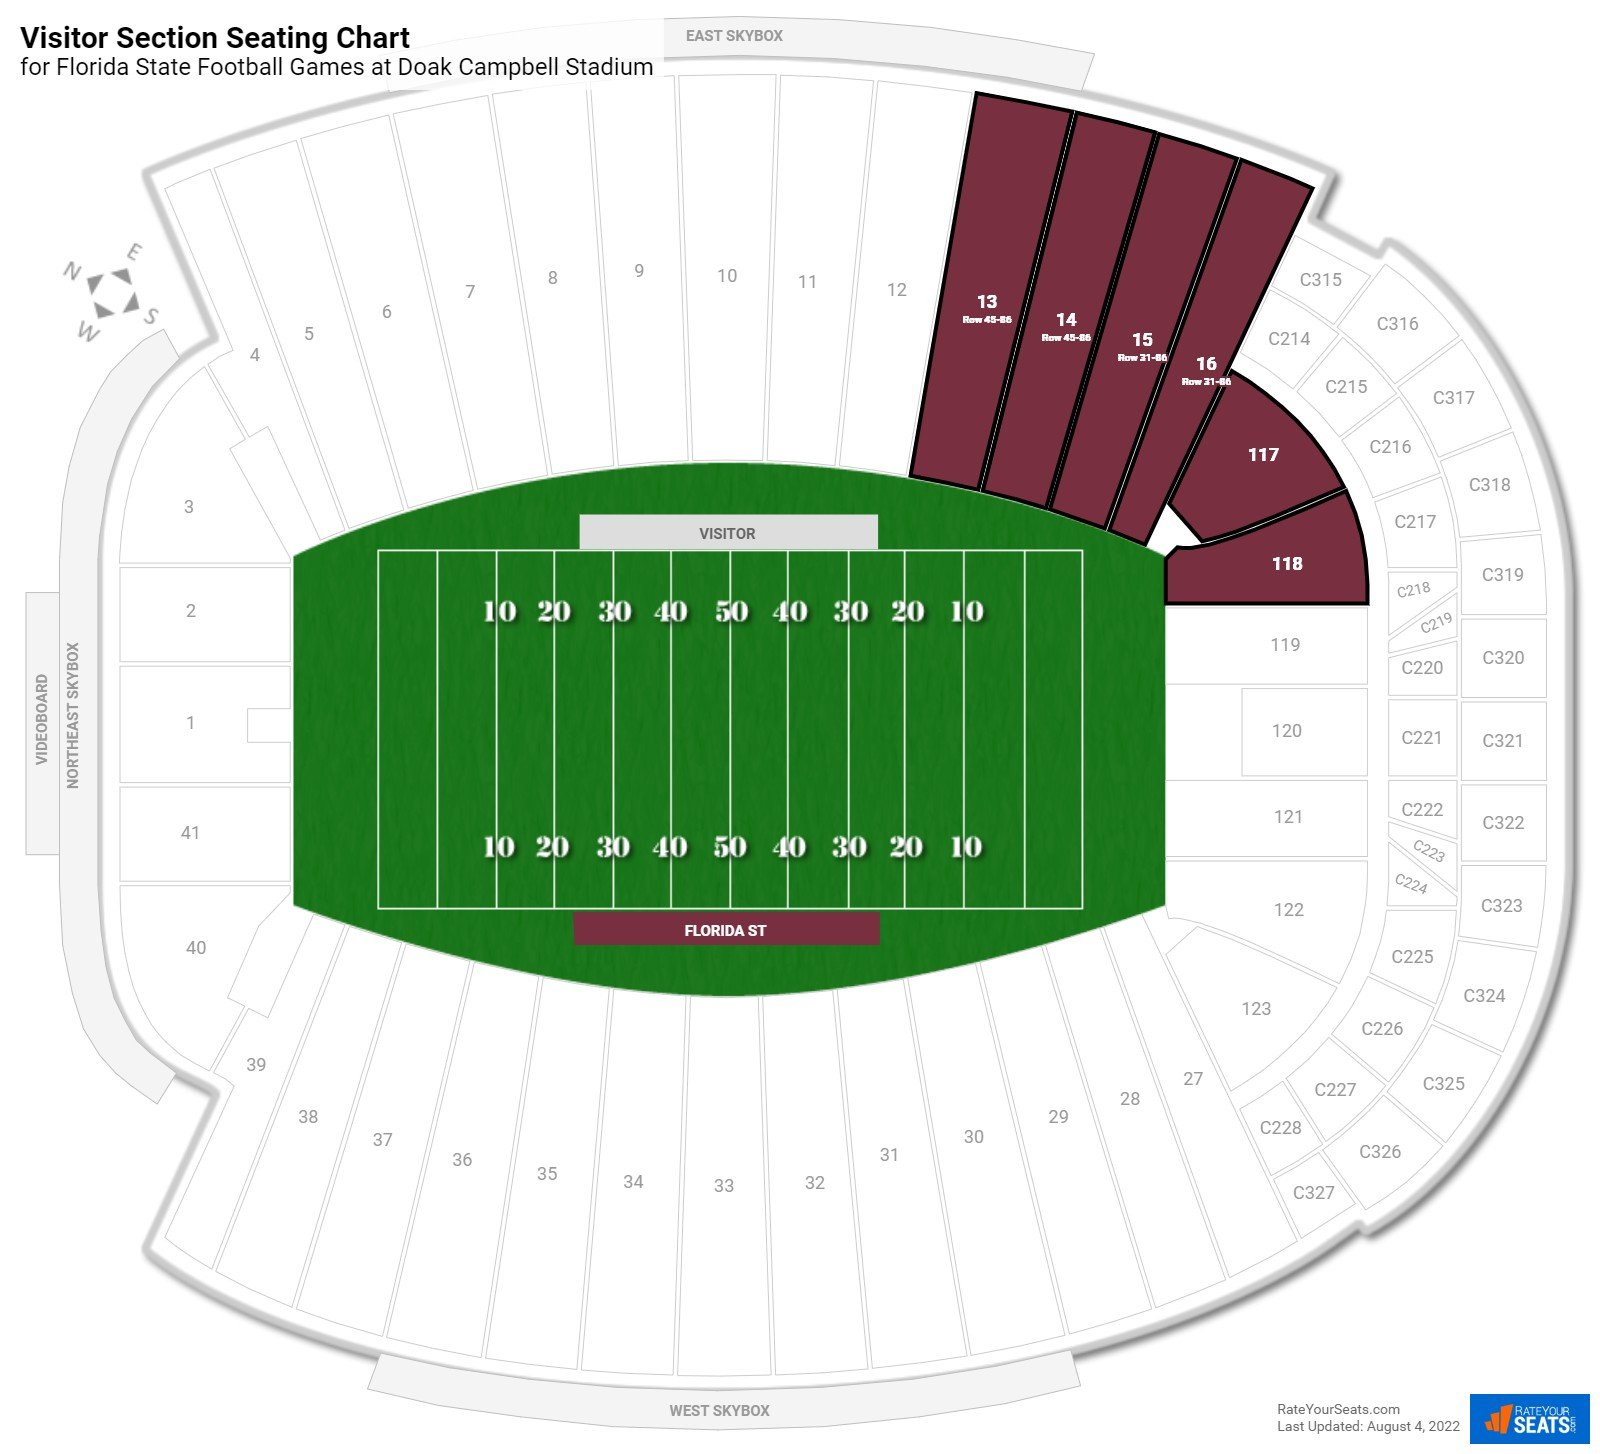 Florida State Visitor Section Seating Chart at Doak Campbell Stadium